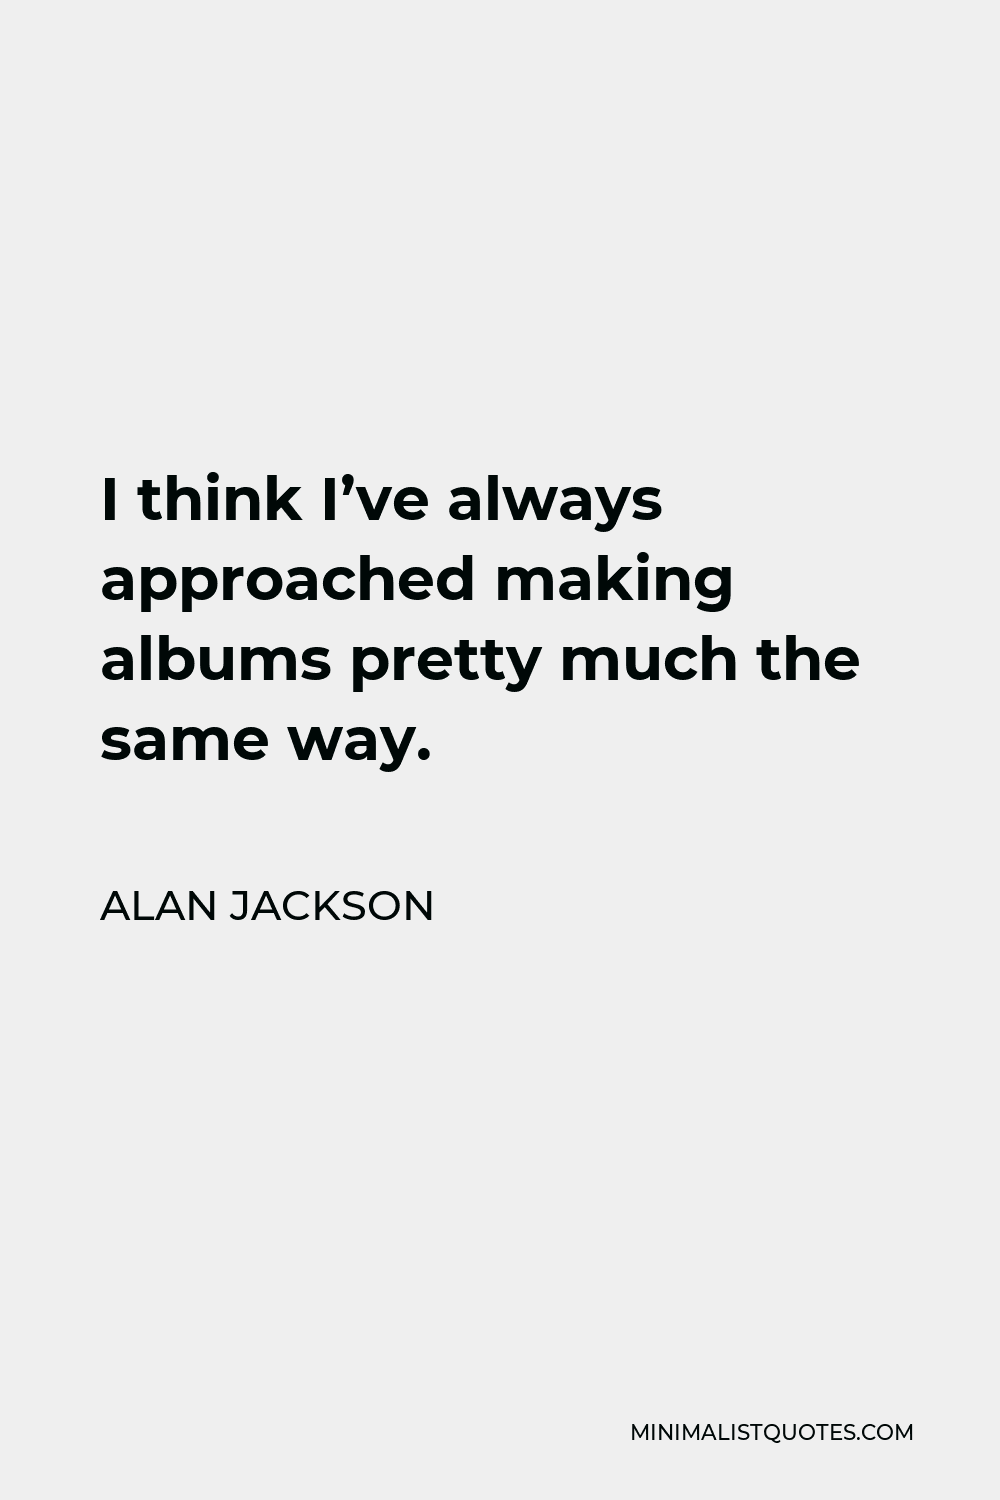 Alan Jackson Quote - I think I’ve always approached making albums pretty much the same way.